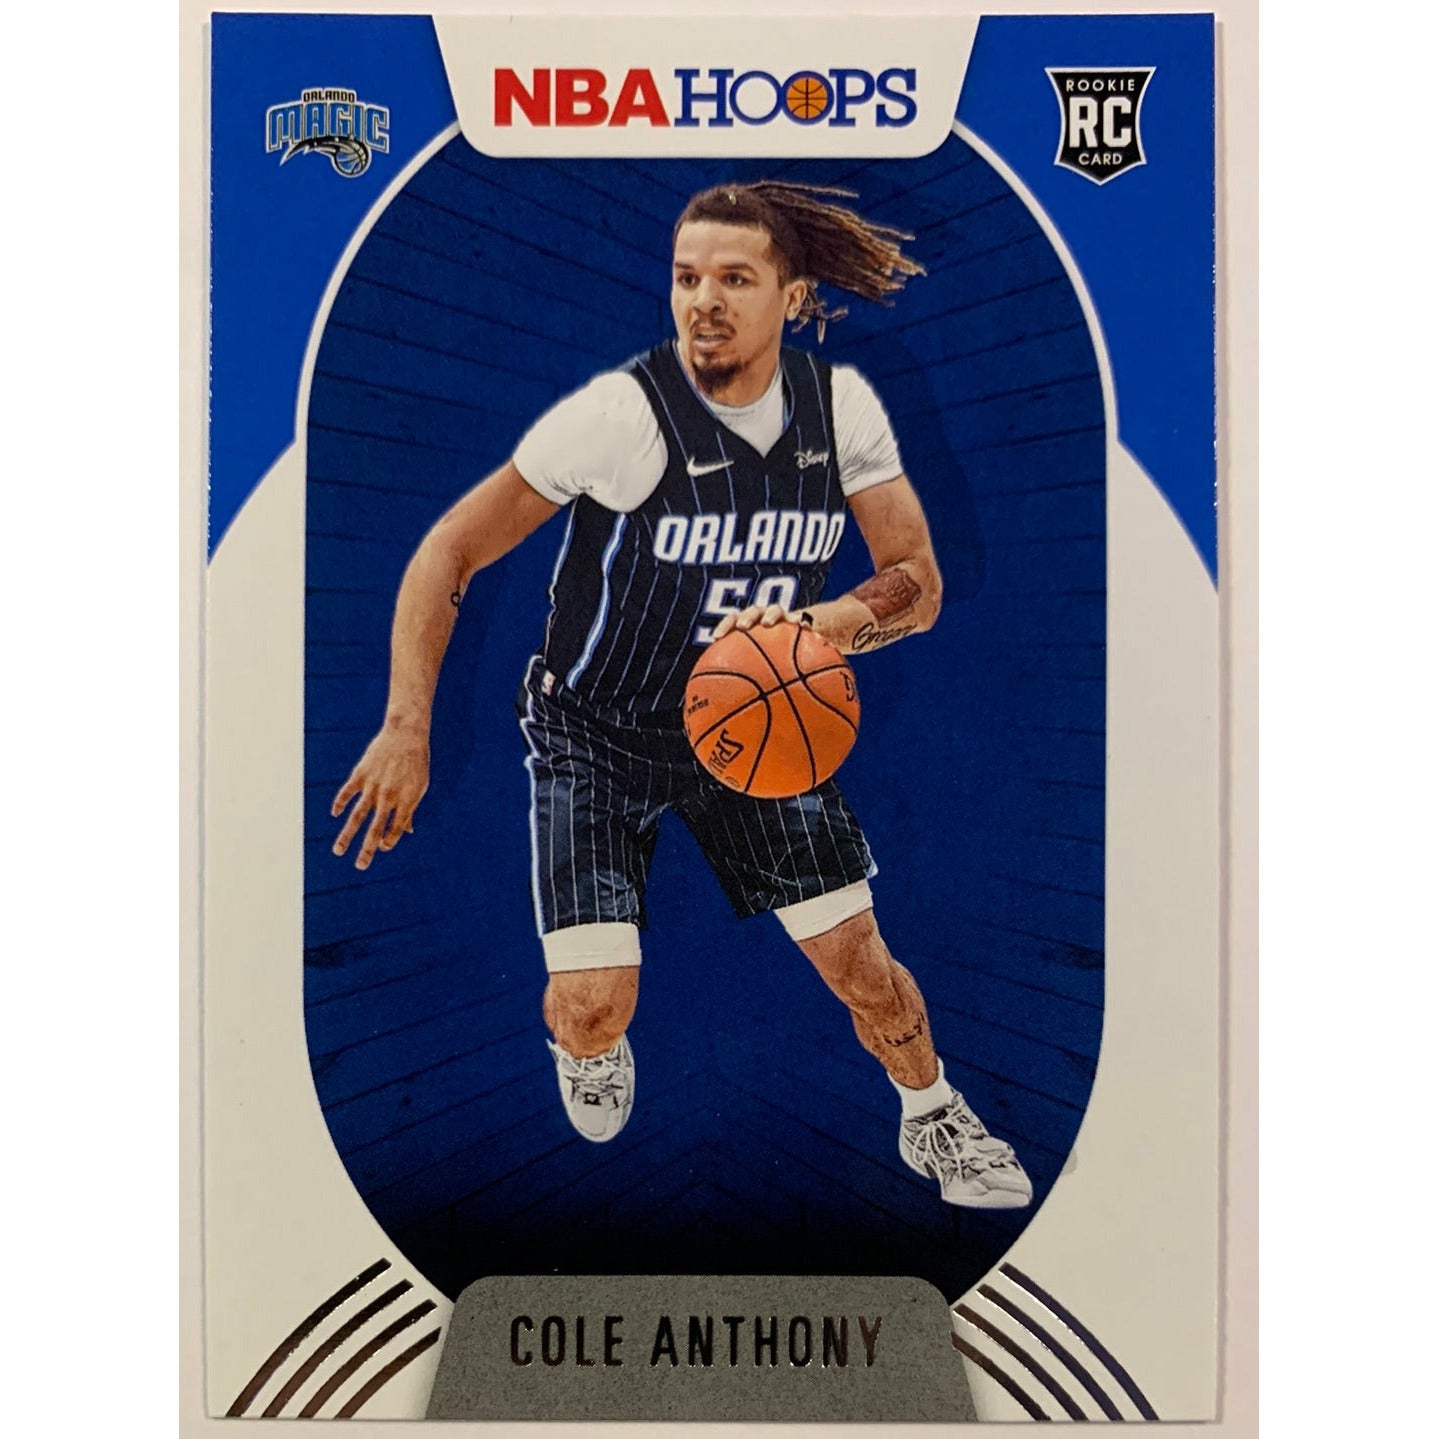  2020-21 Hoops Cole Anthony RC  Local Legends Cards & Collectibles